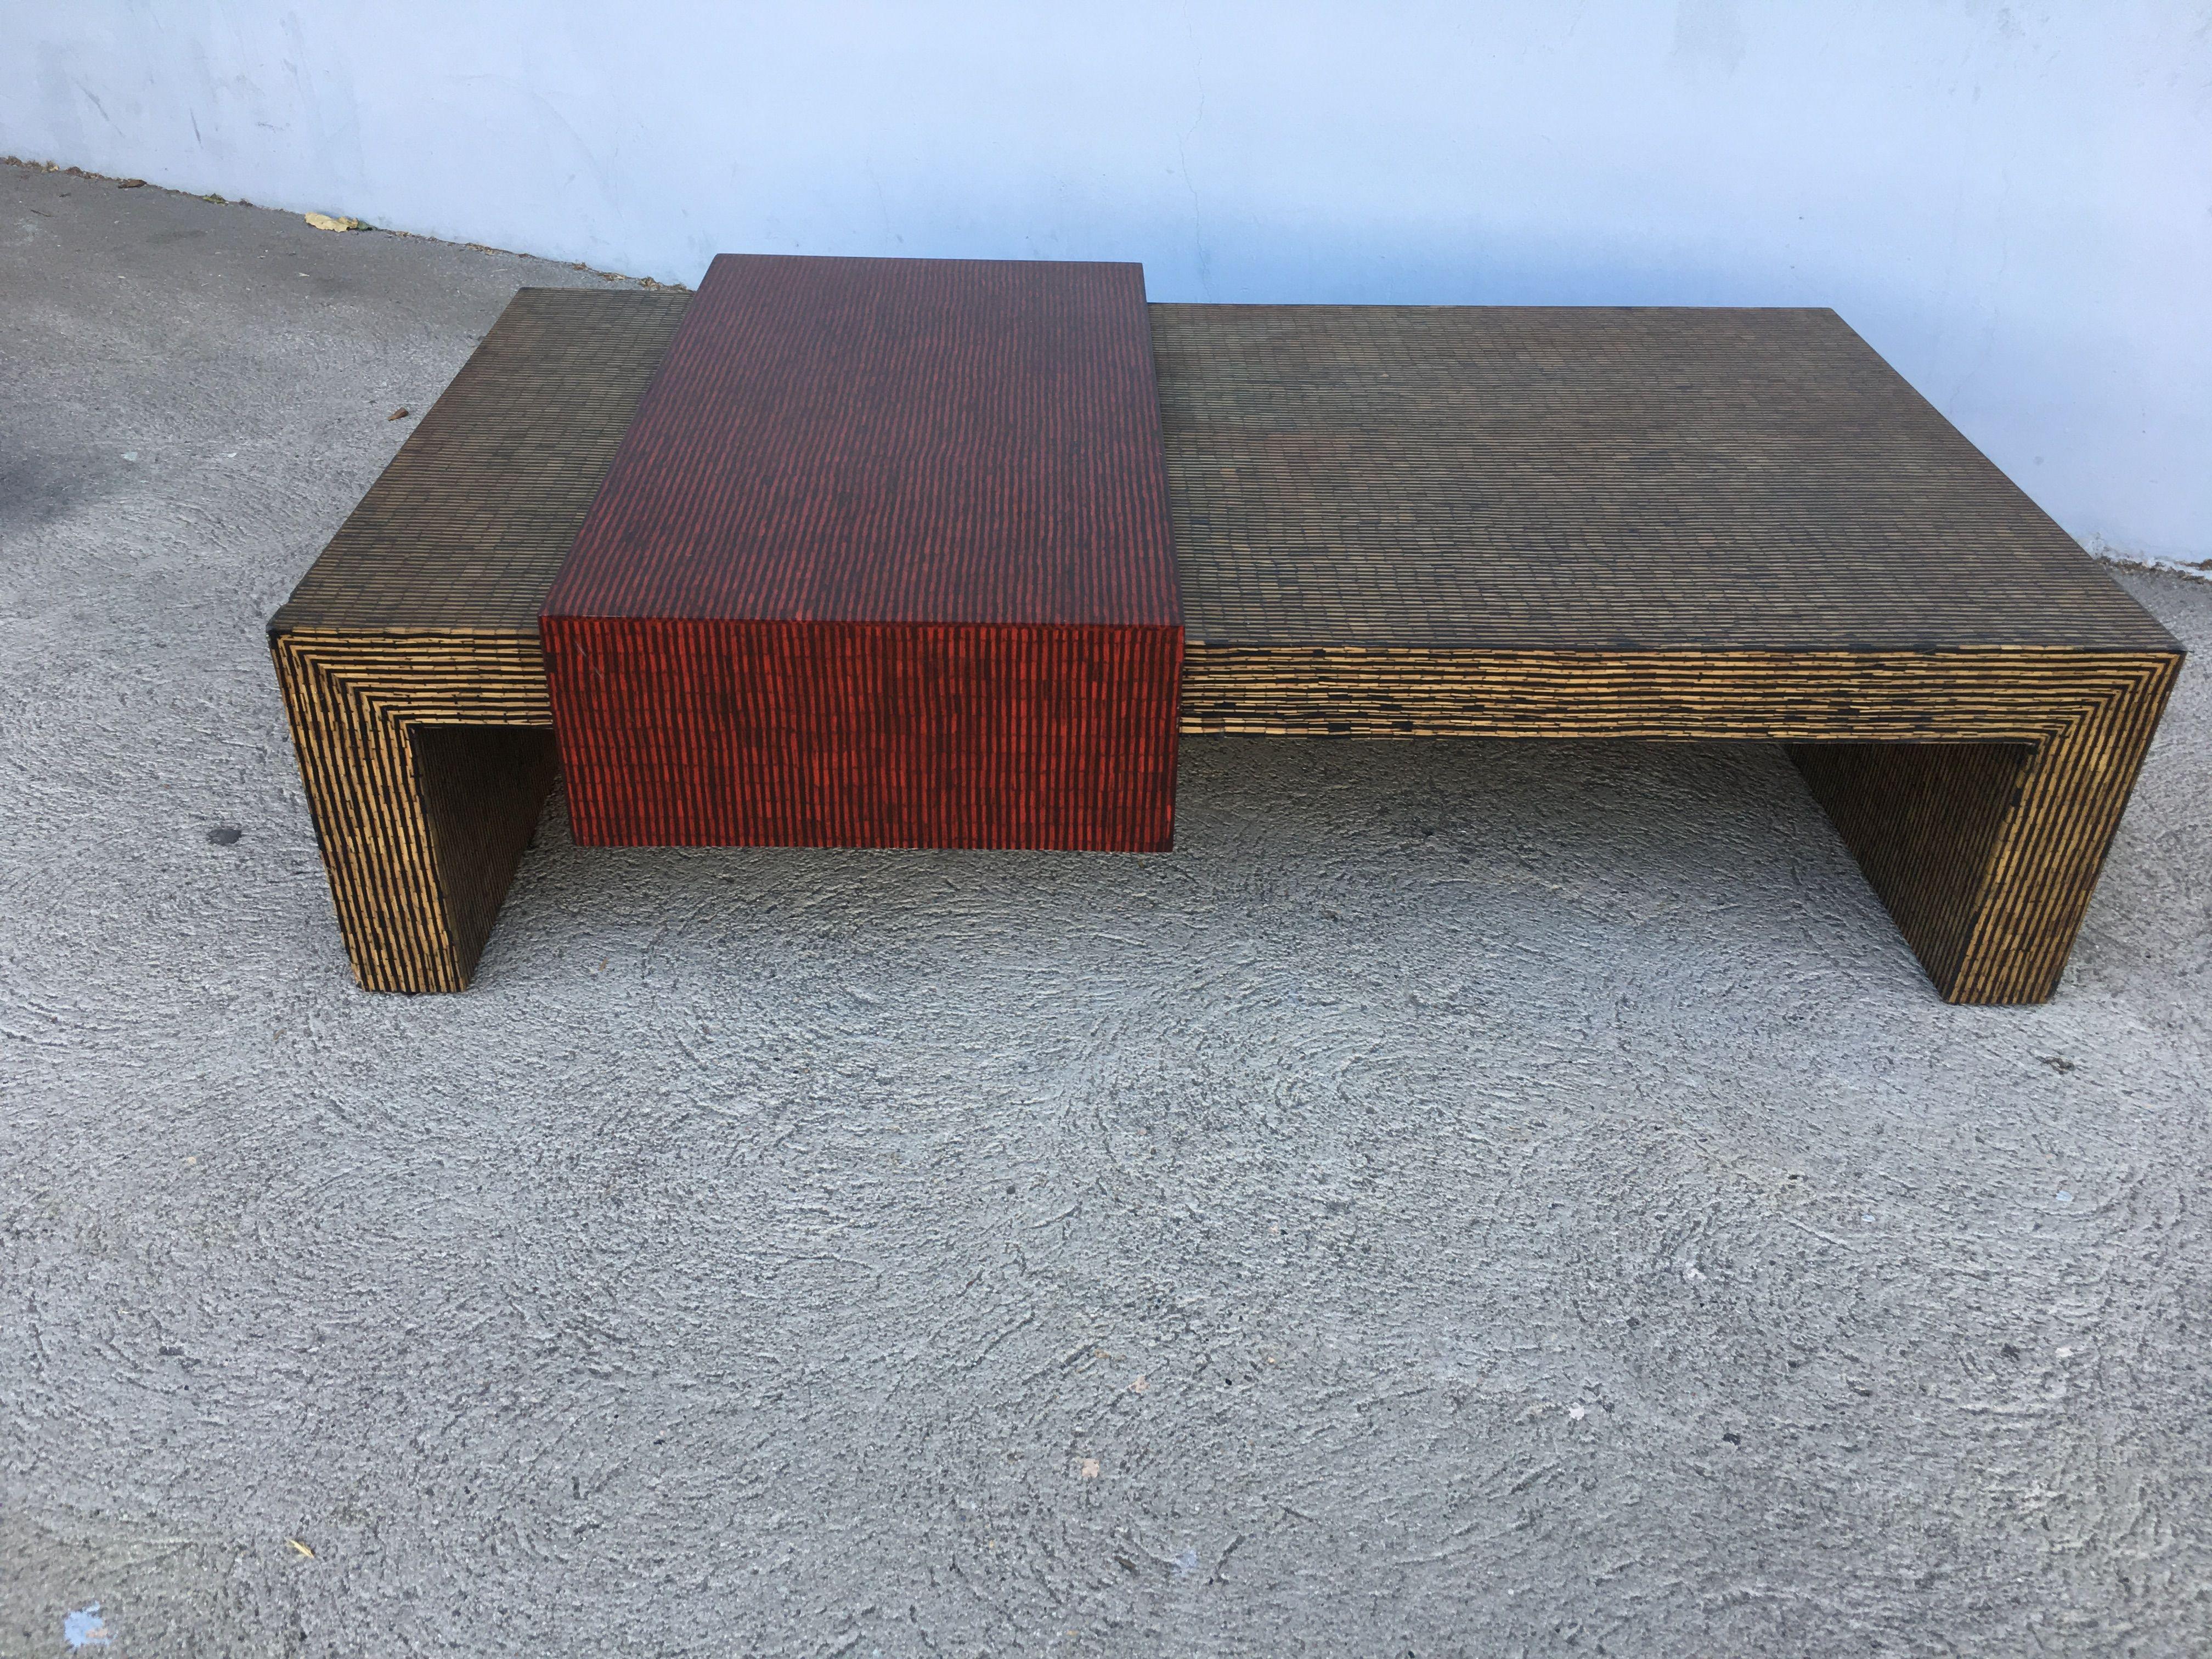 Two-tone cubist style coffee/cocktail table with red and tan textured vinyl tops. Matching side tables available search 